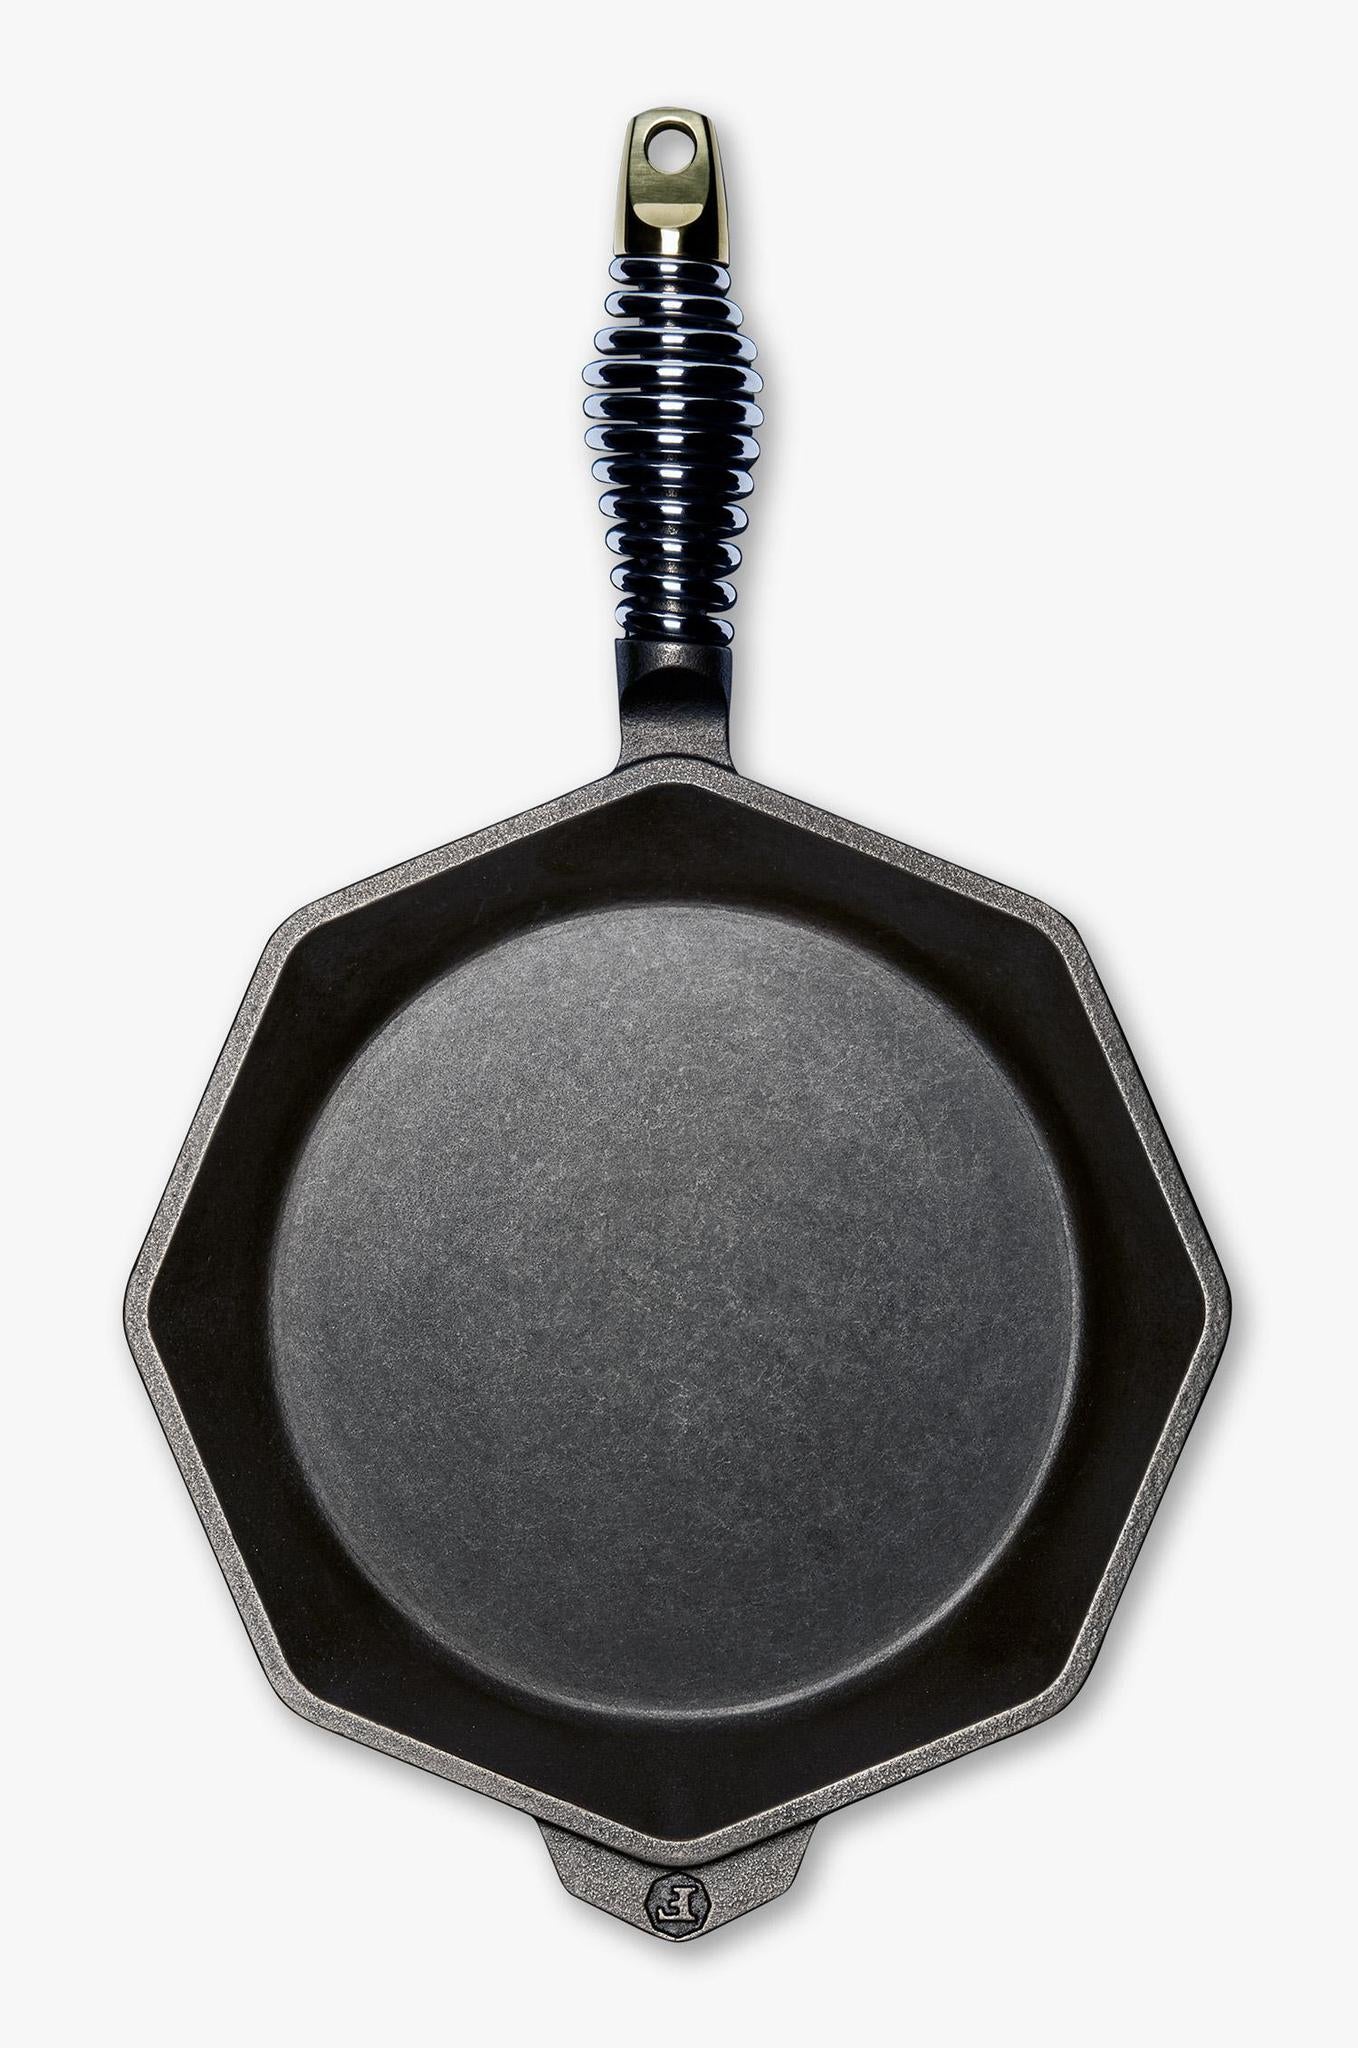 FINEX Cast-Iron Skillet with Lid